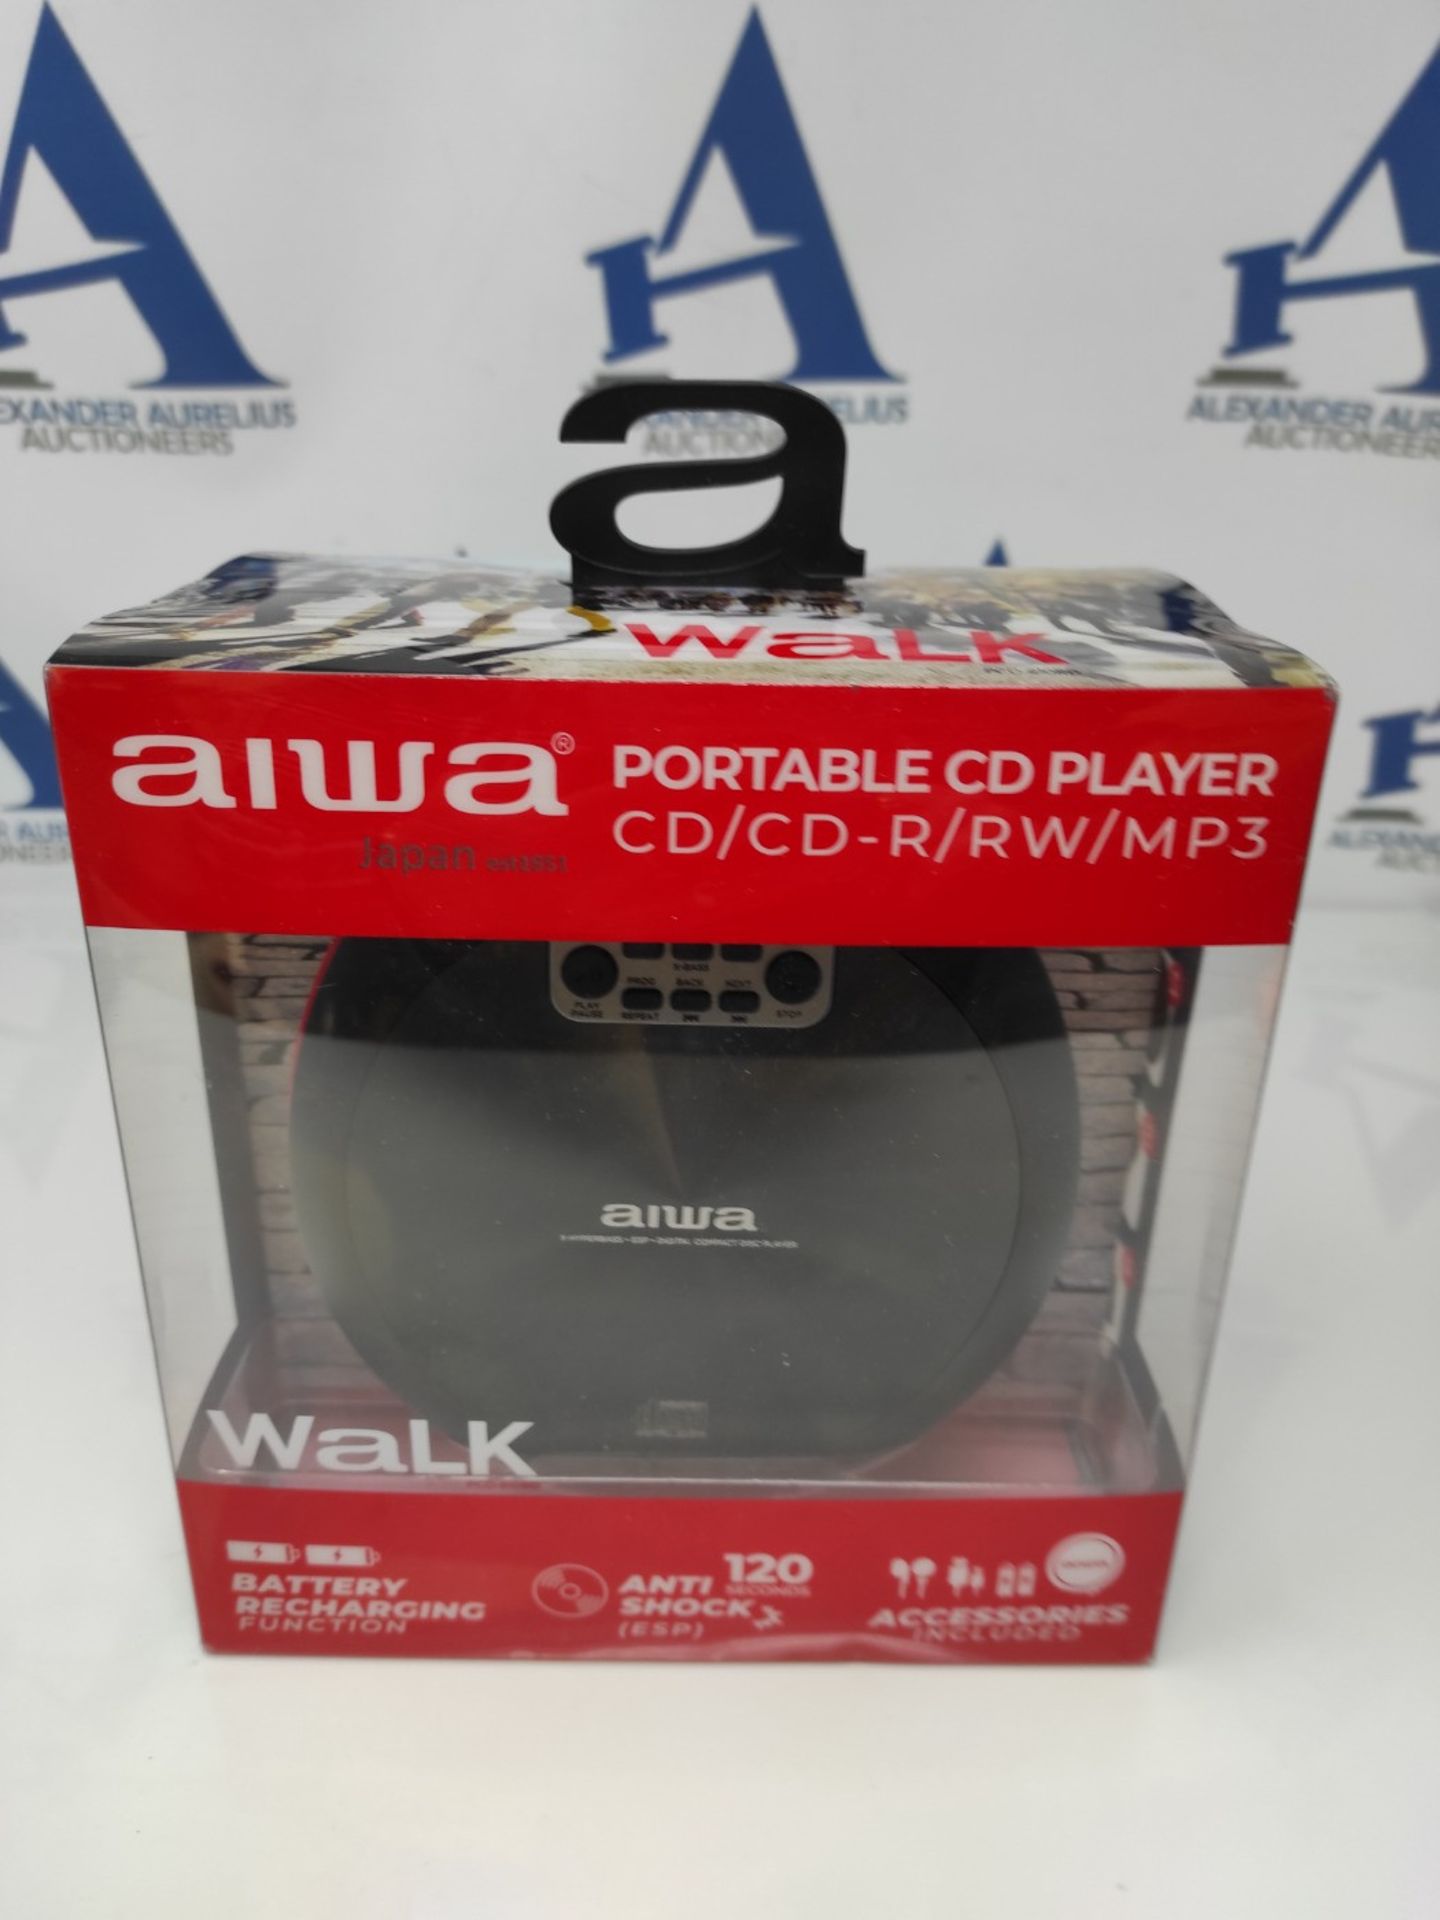 AIWA PCD-810RD CD Player Red and Black - Image 2 of 3